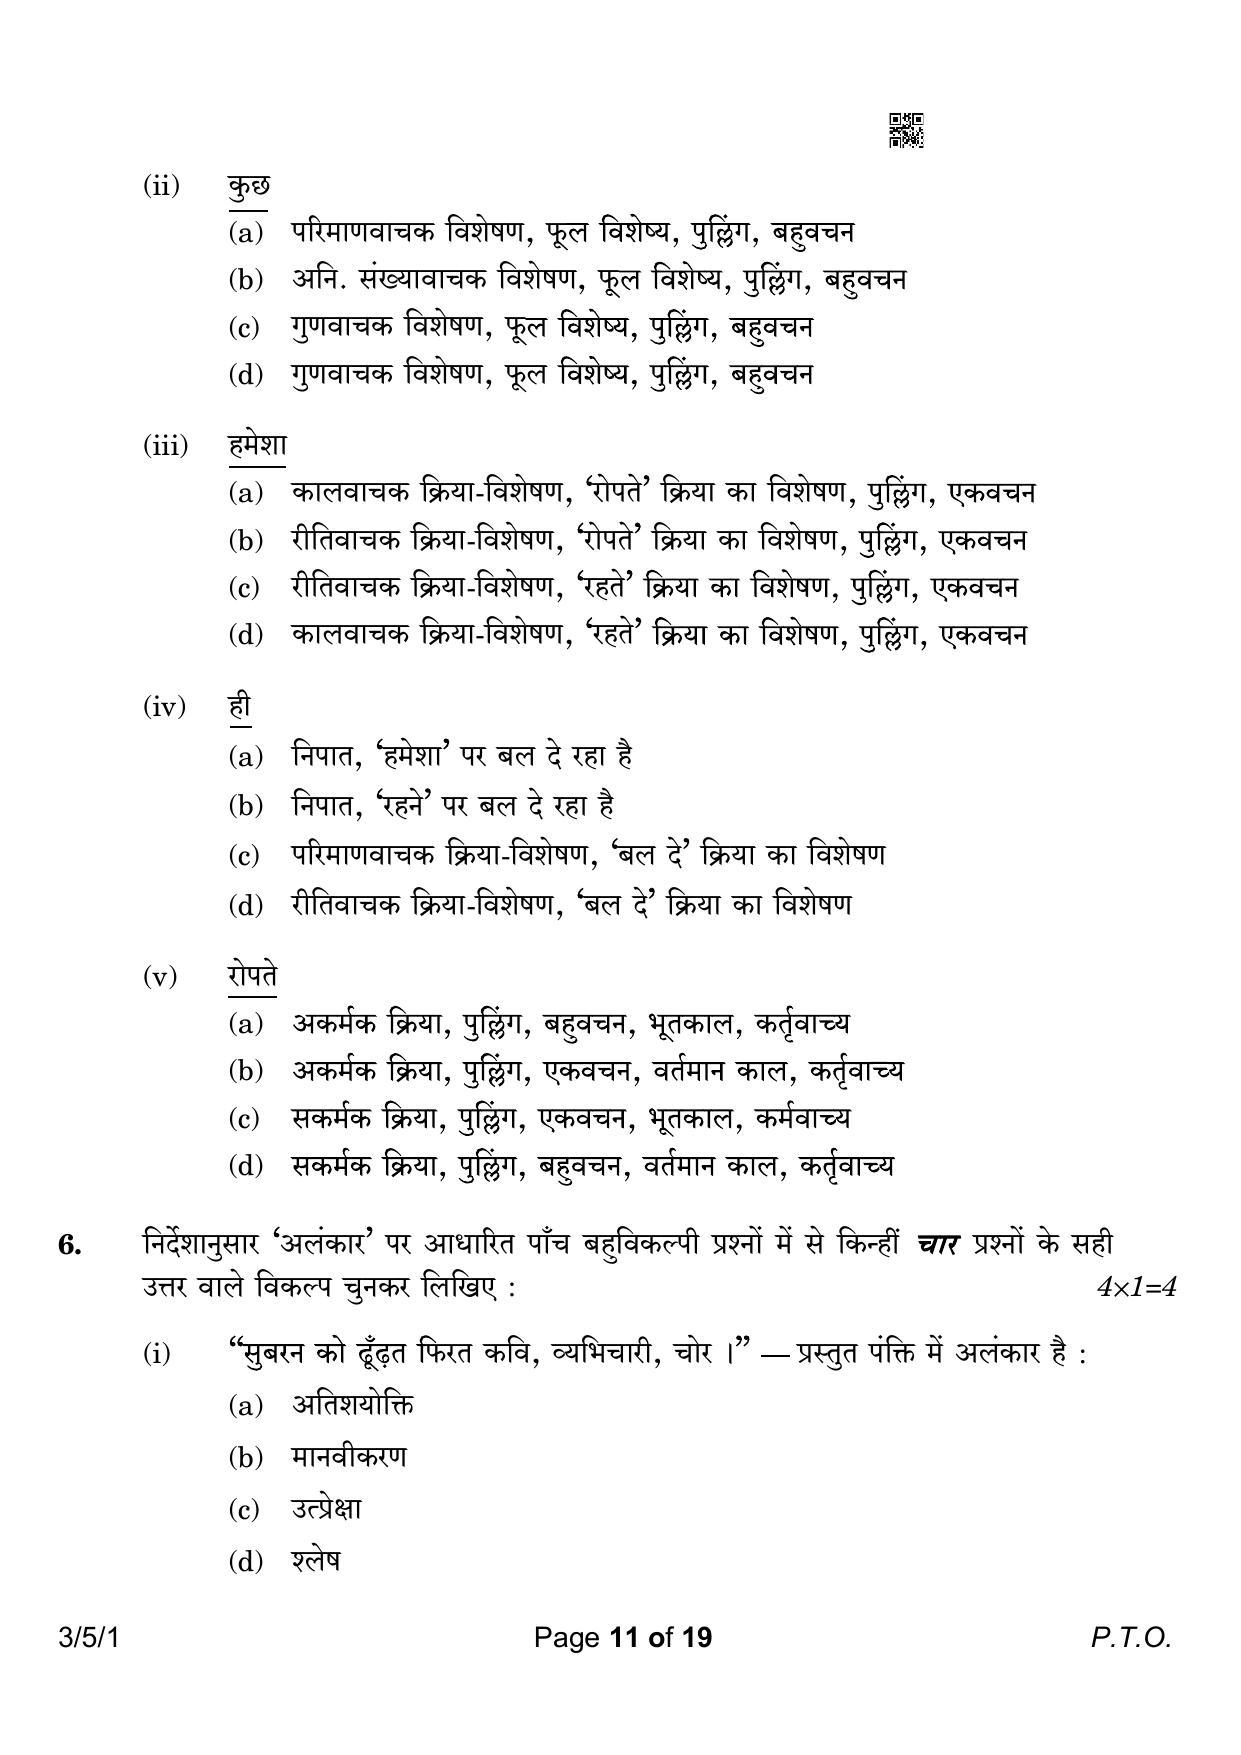 CBSE Class 10 3-5-1 Hindi A 2023 Question Paper - Page 11